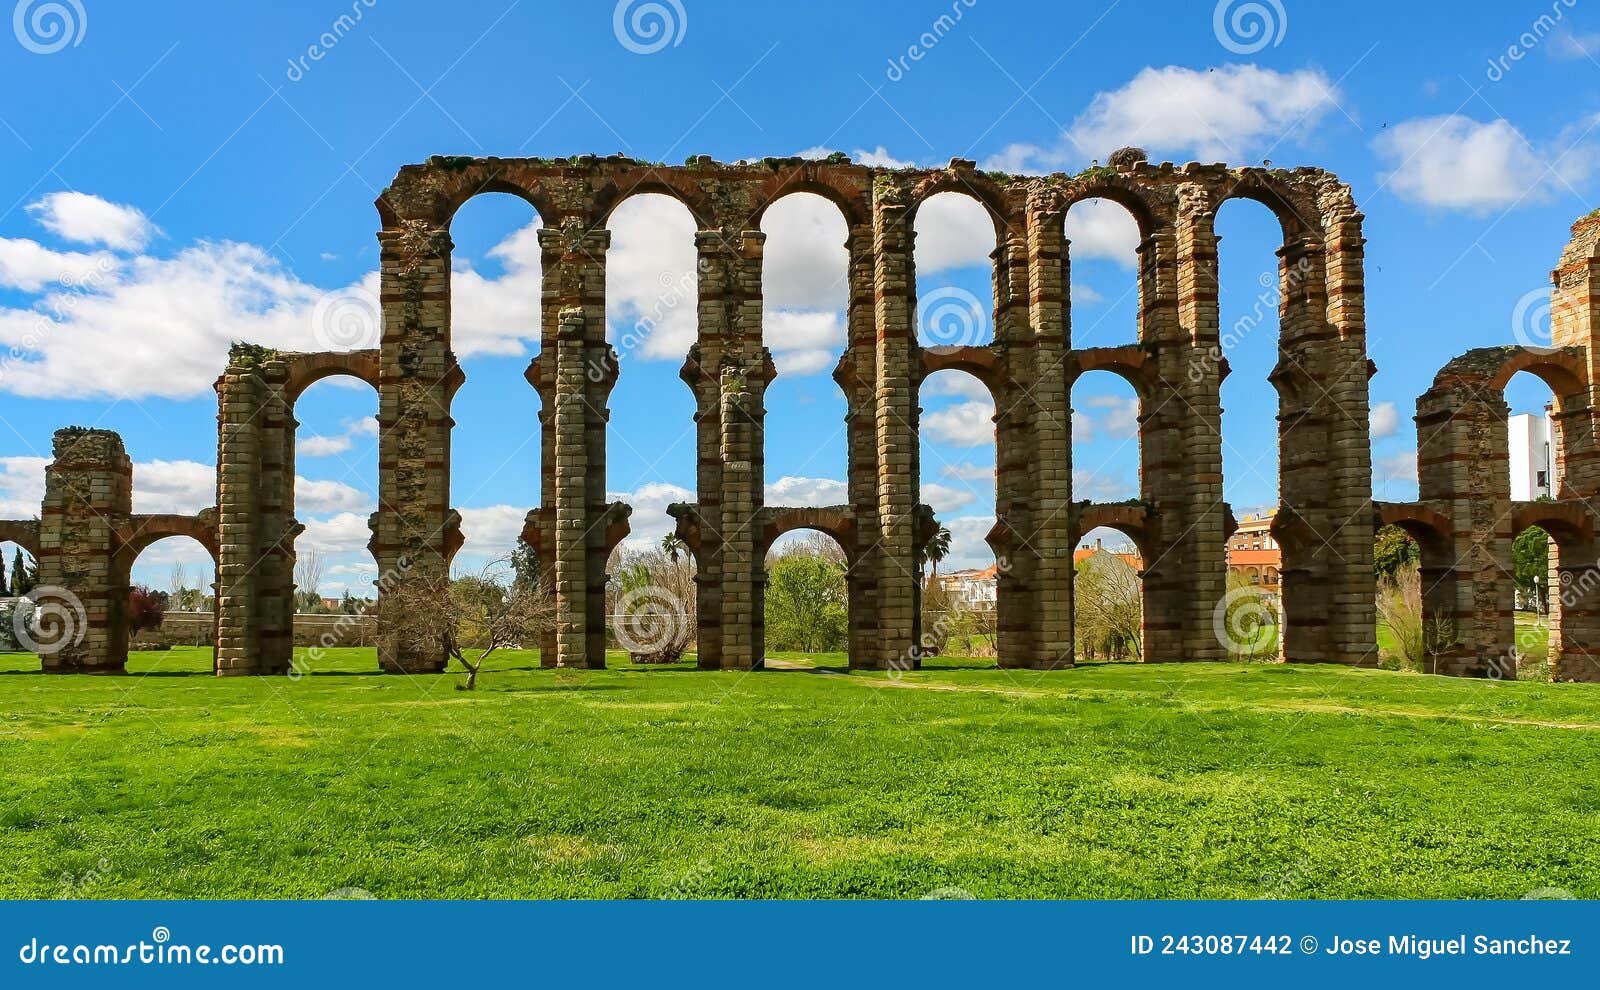 panoramic of the famous roman aqueduct of mÃÂ©rida for the transport of water.